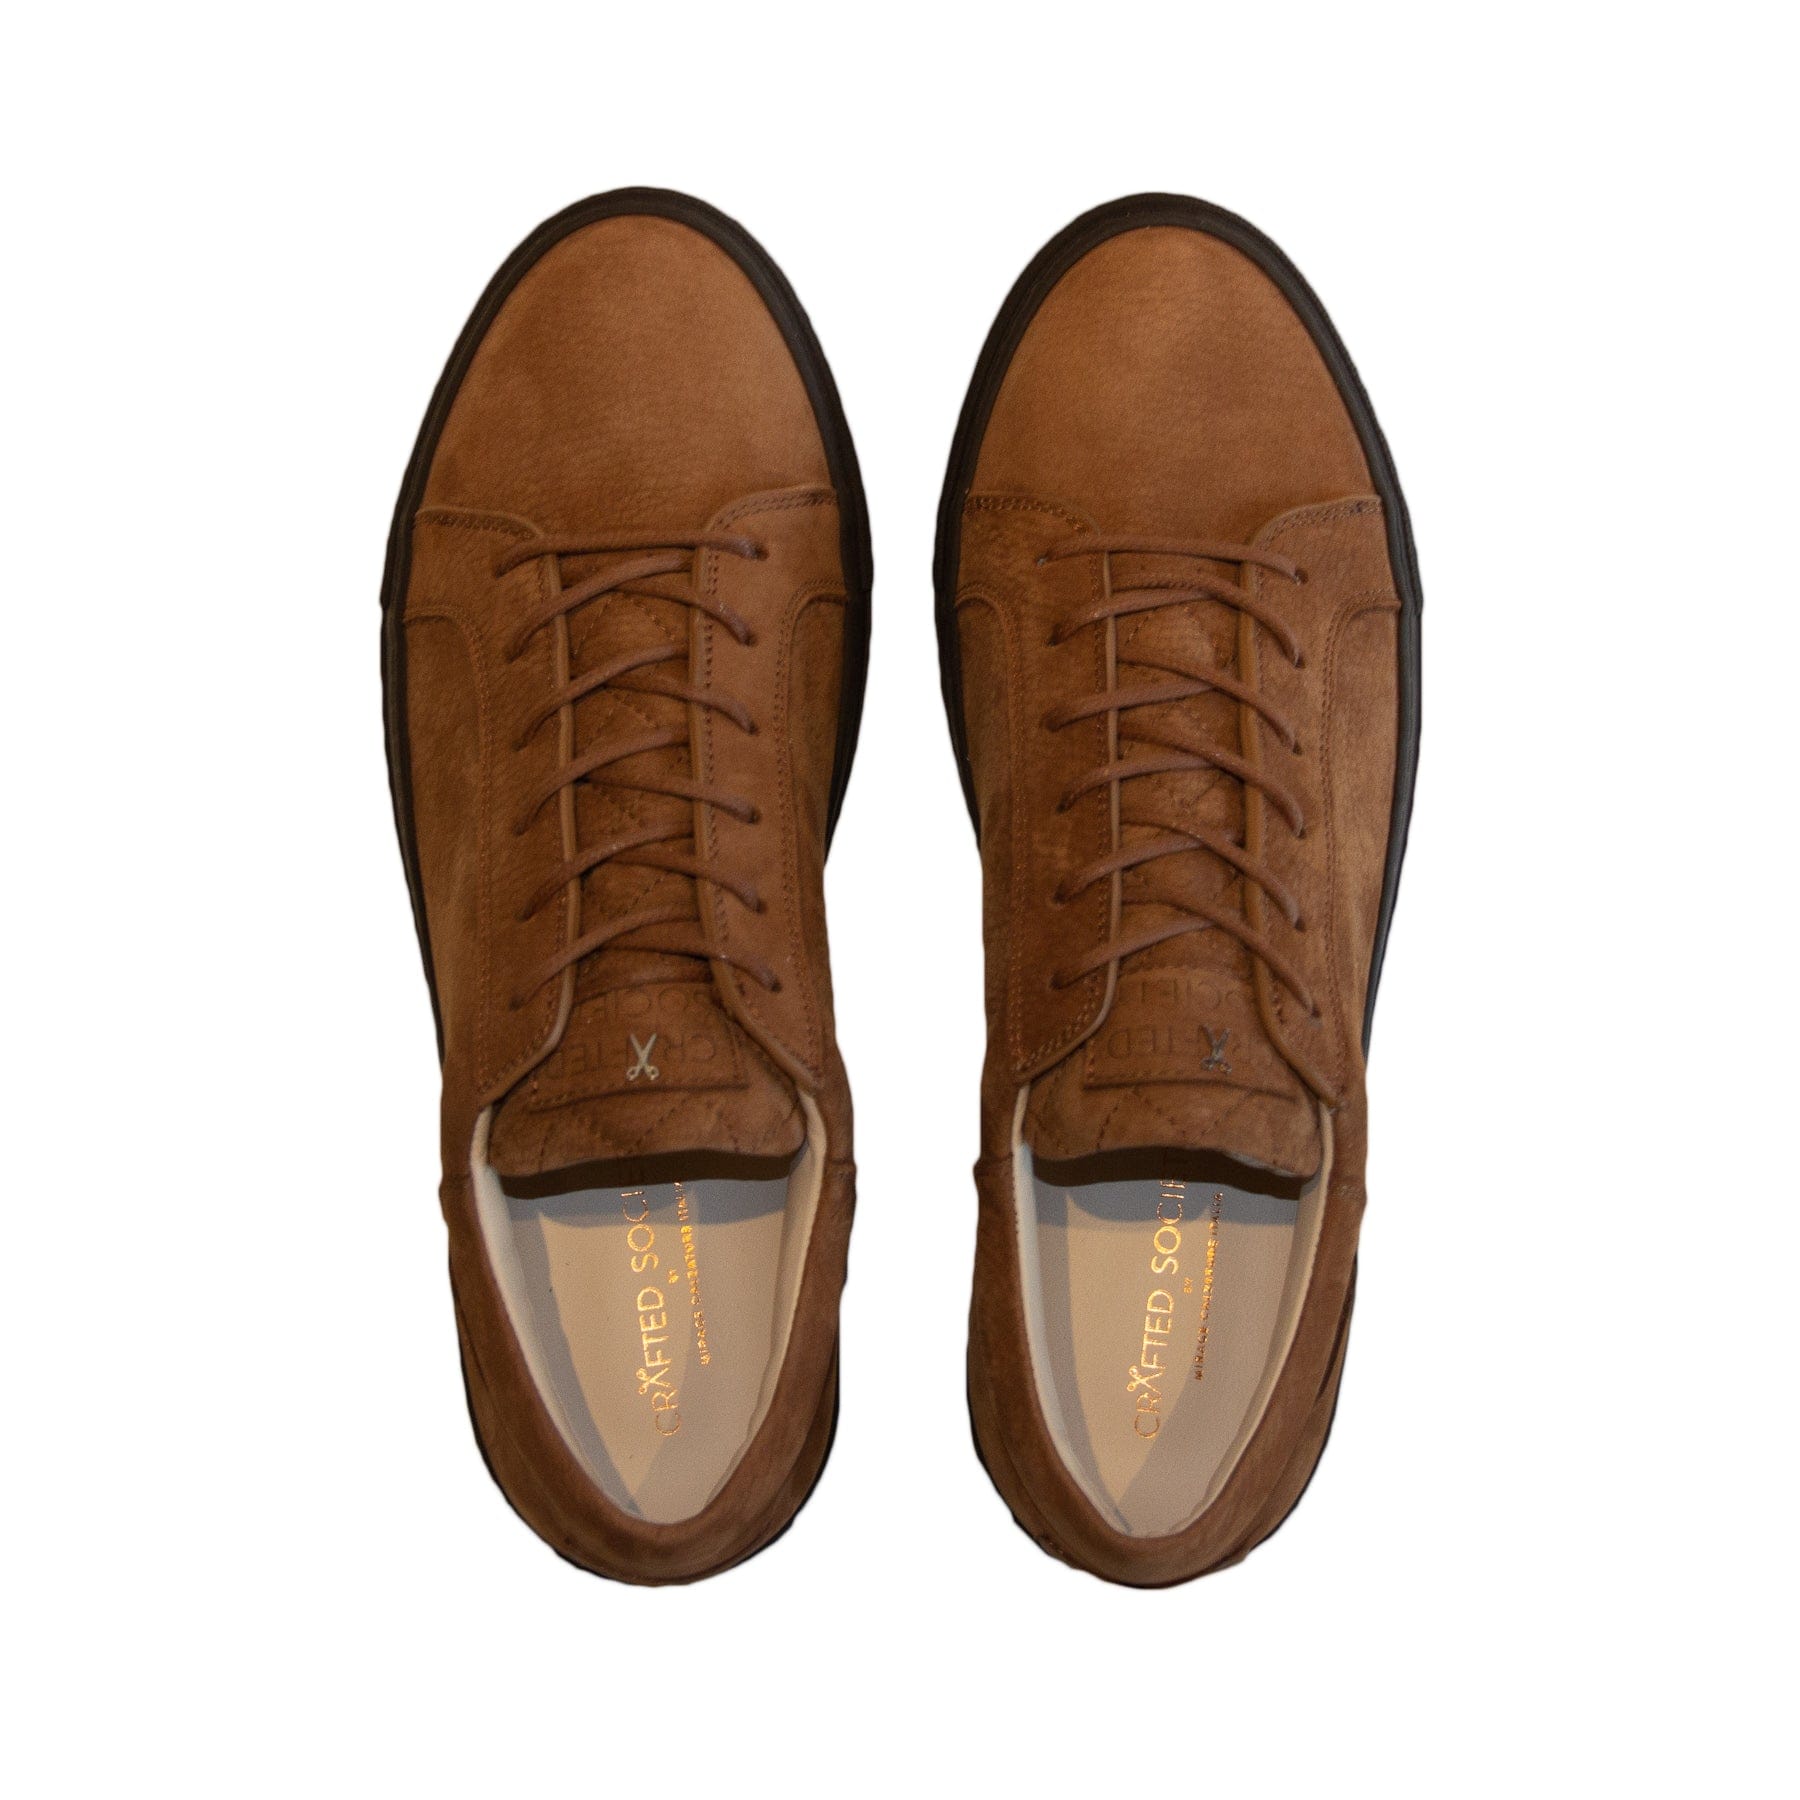 Mario Low Refined Sneaker Cognac Nubuck Chocolate Outsole Aboveview